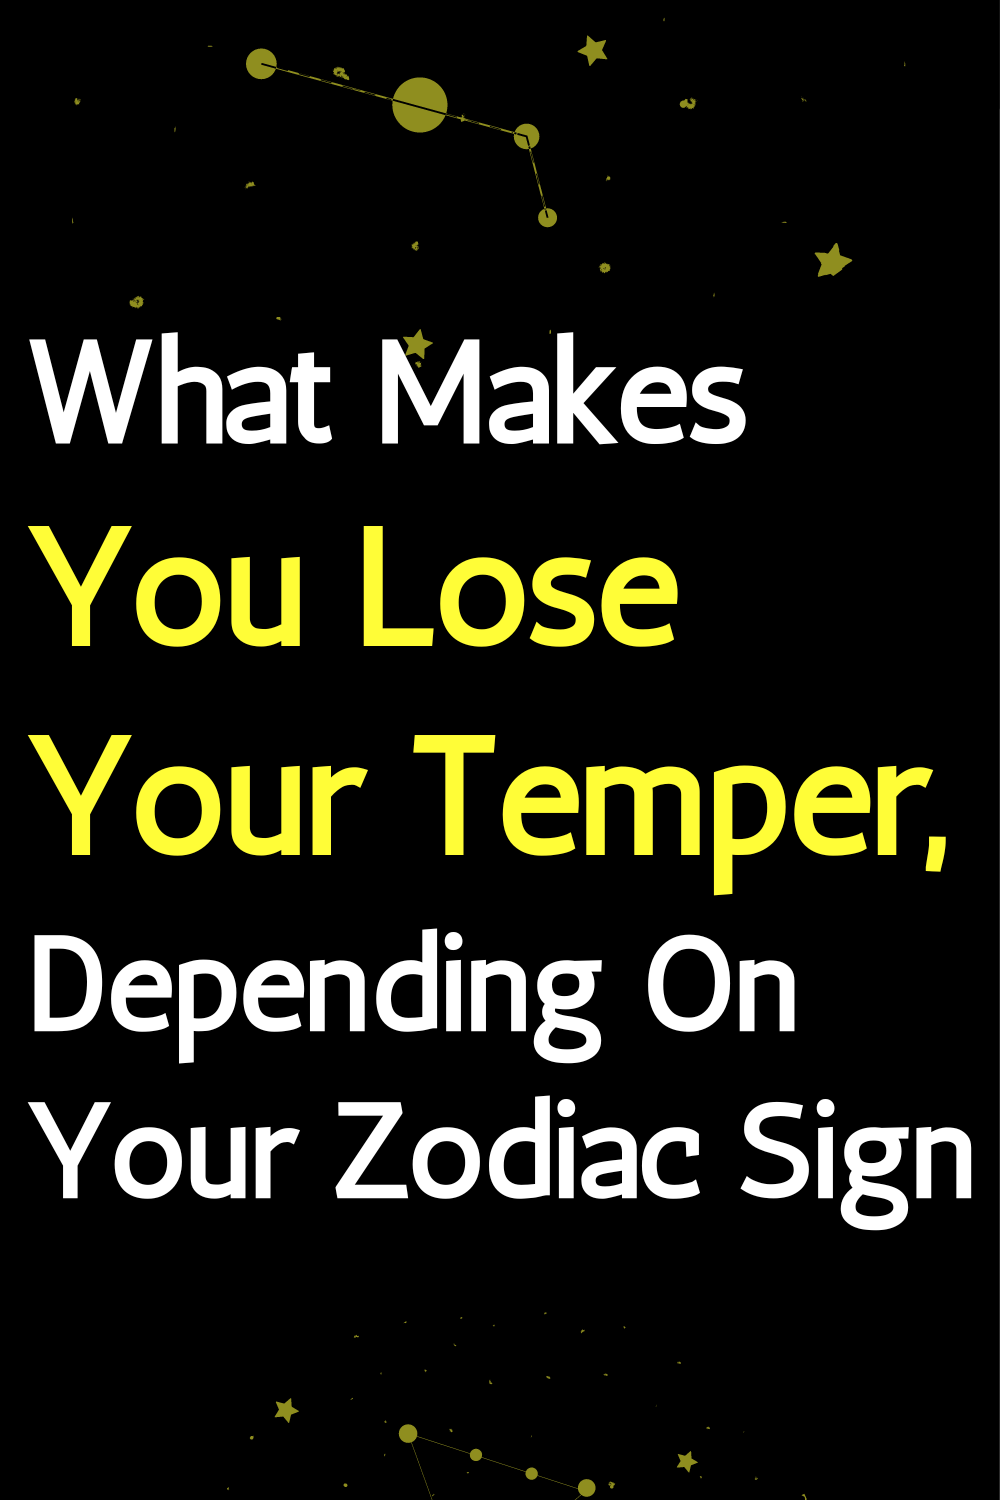 What Makes You Lose Your Temper, Depending On Your Zodiac Sign